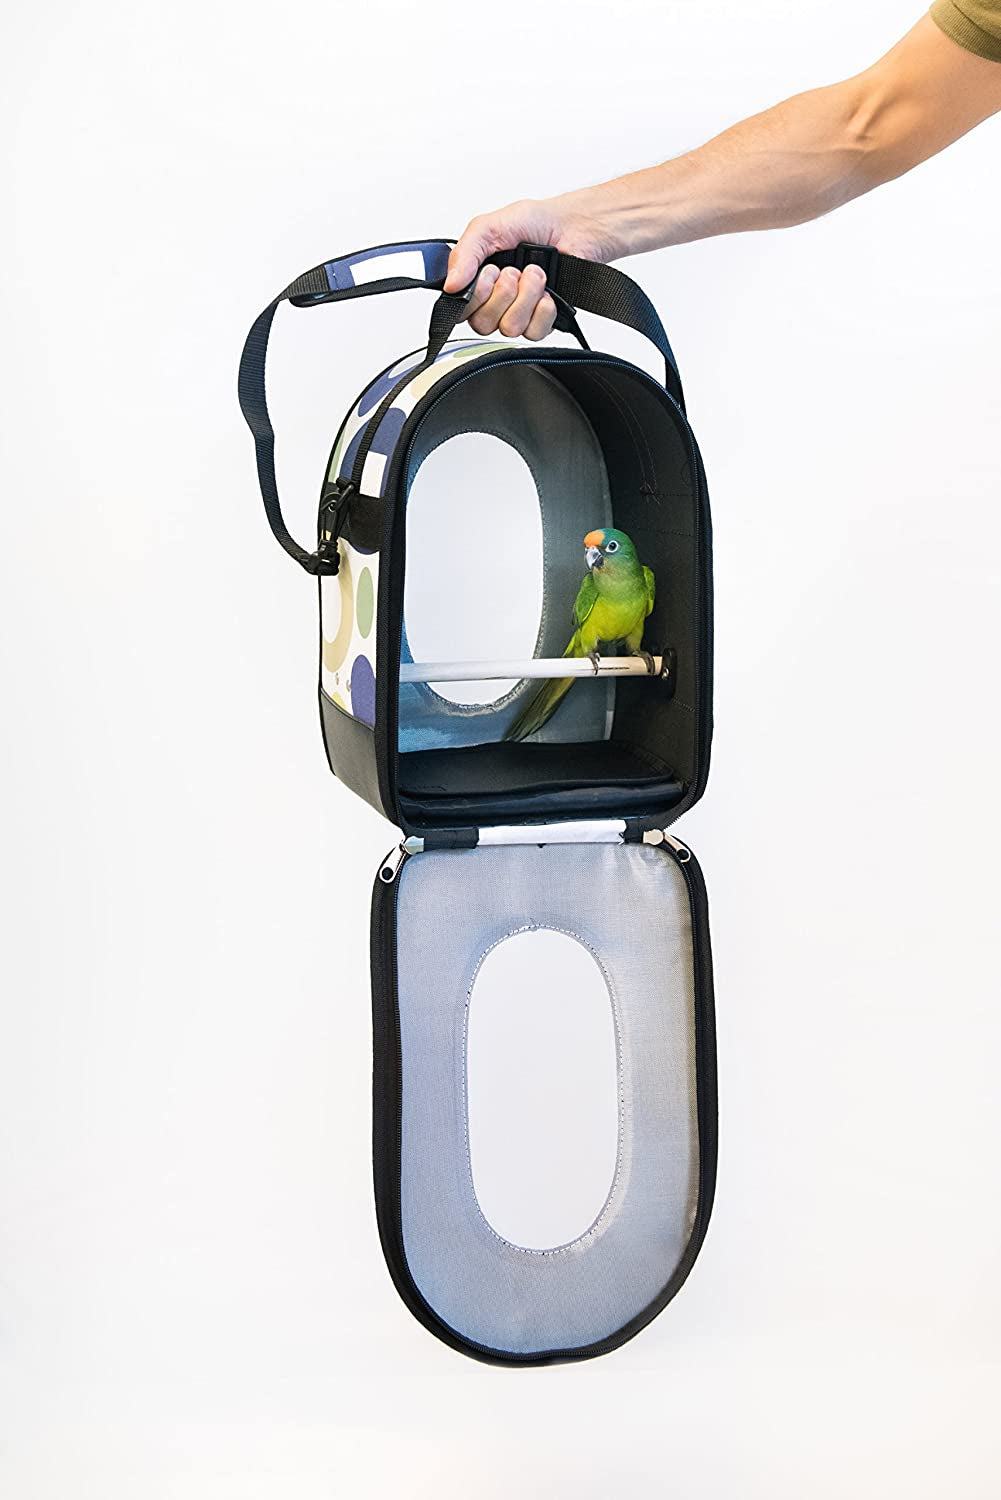 1 count Prevue Softcase Travel Carrier for Small Birds